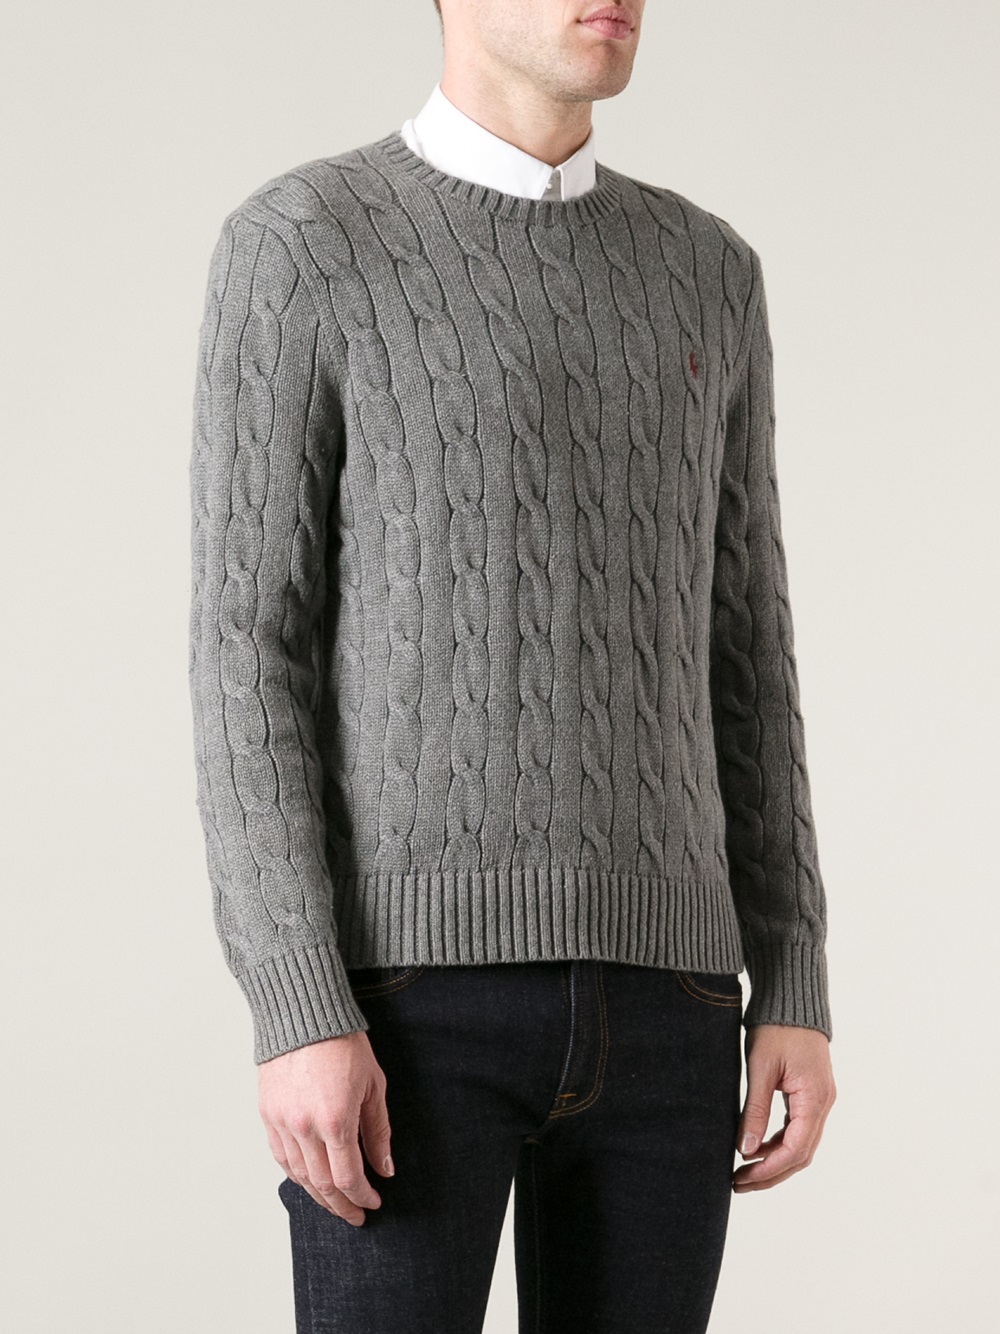 Lyst - Polo ralph lauren Cable Knit Sweater in Gray for Men